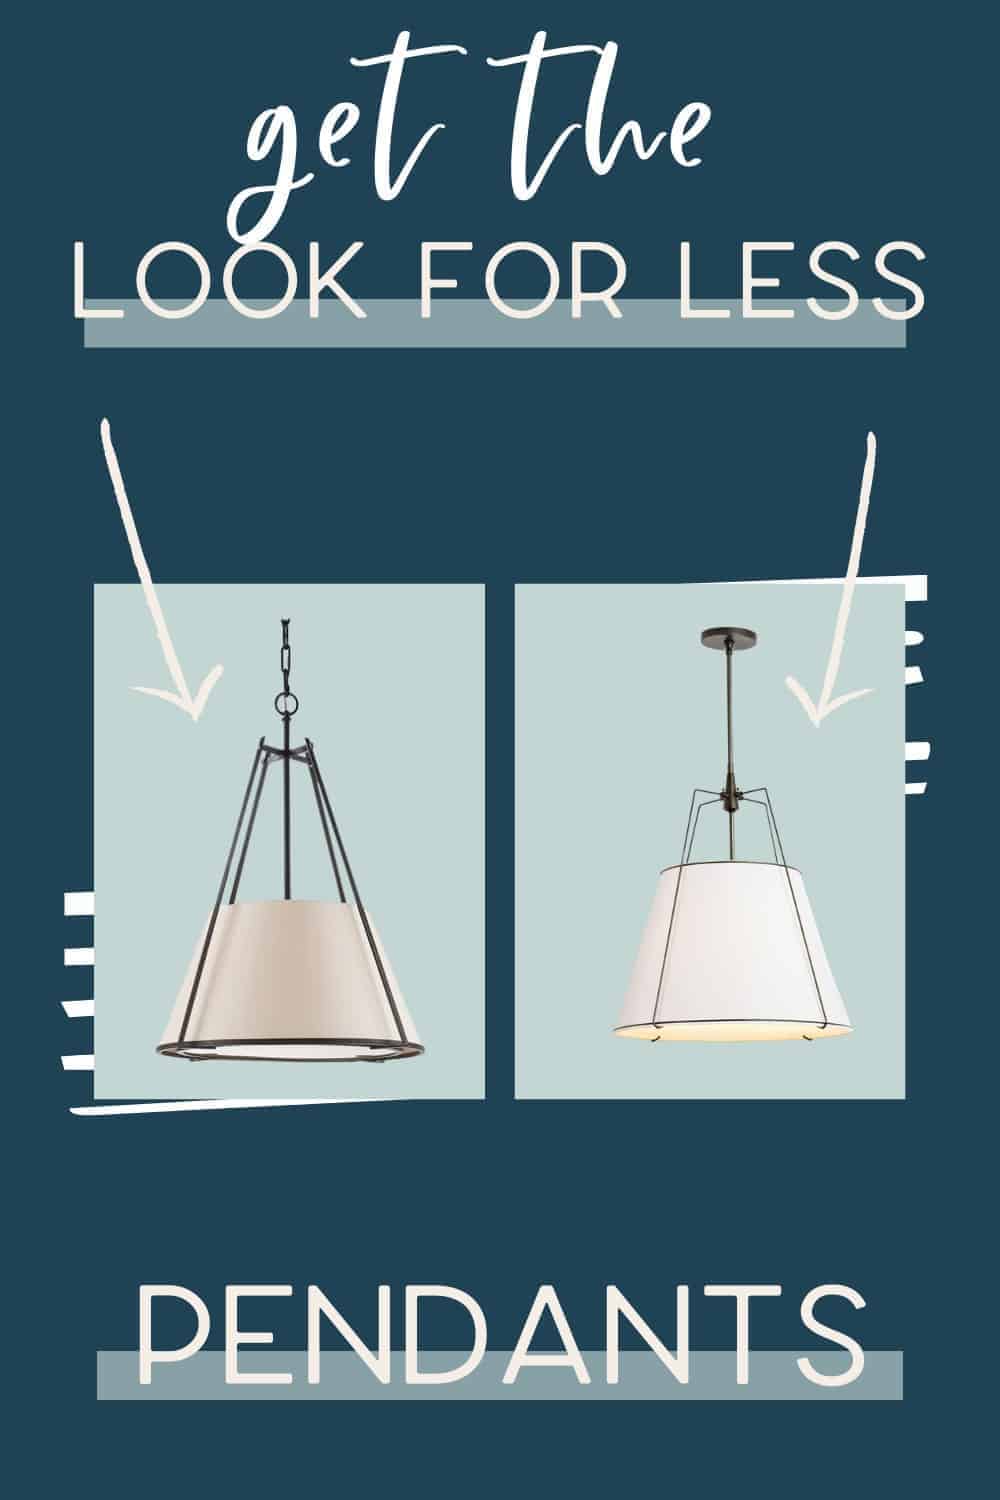 It's time for another edition of get the look for less and today I'm sharing look for less pendants! You can have a beautiful stylish home without breaking the bank!  Find a beautiful pendant at a budget friendly price.  These pendants would be perfect in your hallway or as kitchen island lighting.  You don’t have to break the bank to have a beautiful home.  Find bedroom pendants, dining room pendants, and kitchen island pendants.  If you’re looking for light ideas, this is for you!  #pendants #lights #lighting #pendant